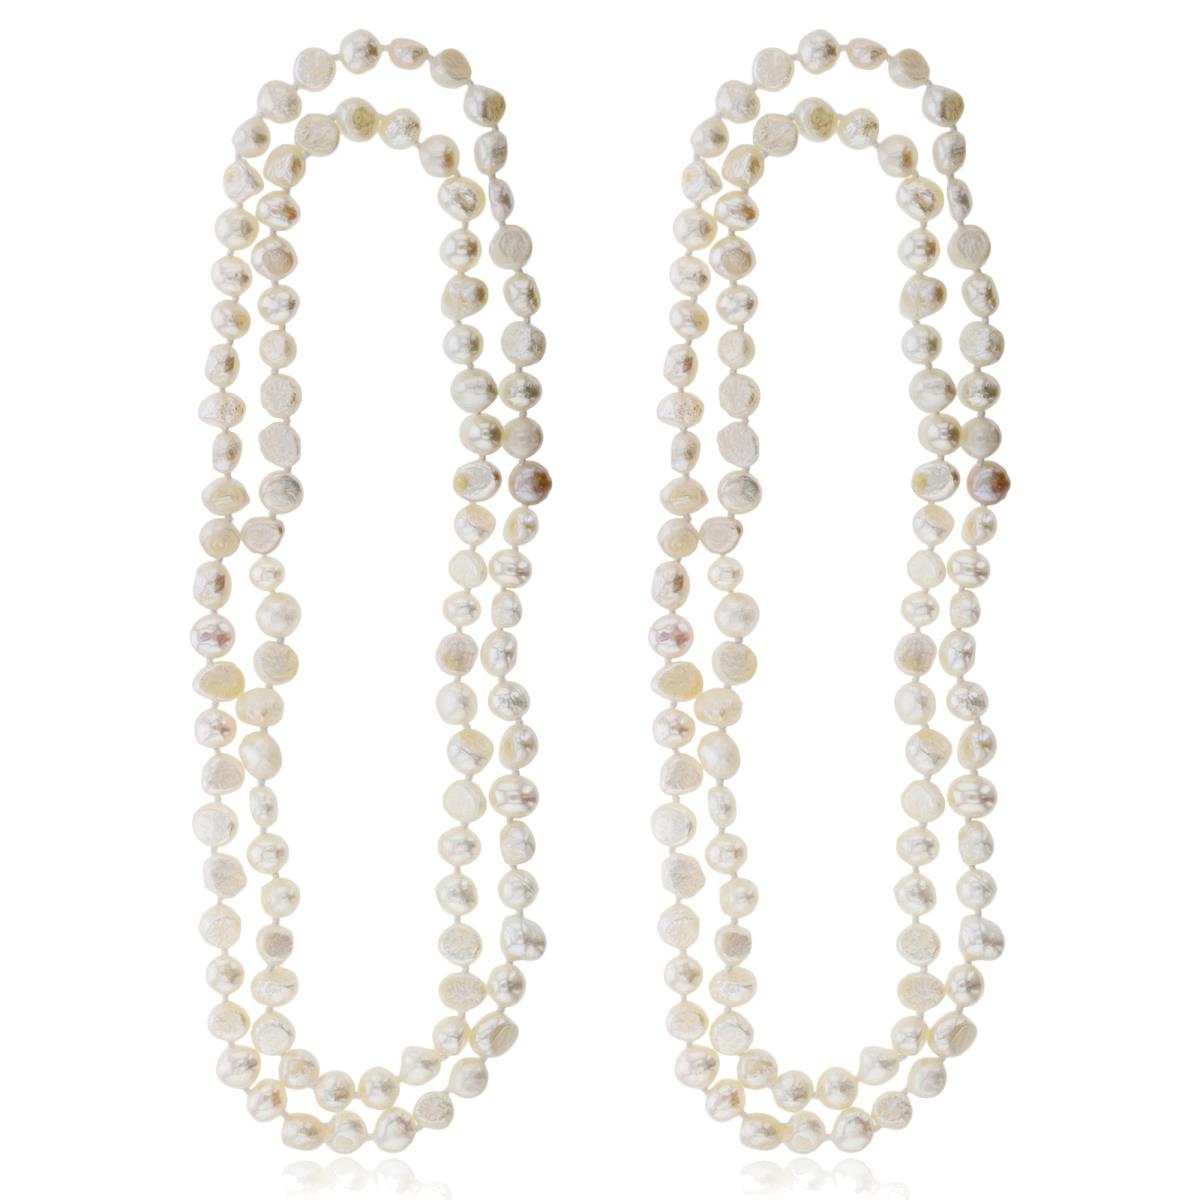 8-9mm Assorted White Fresh Water Pearls 60" Necklace Set of 2